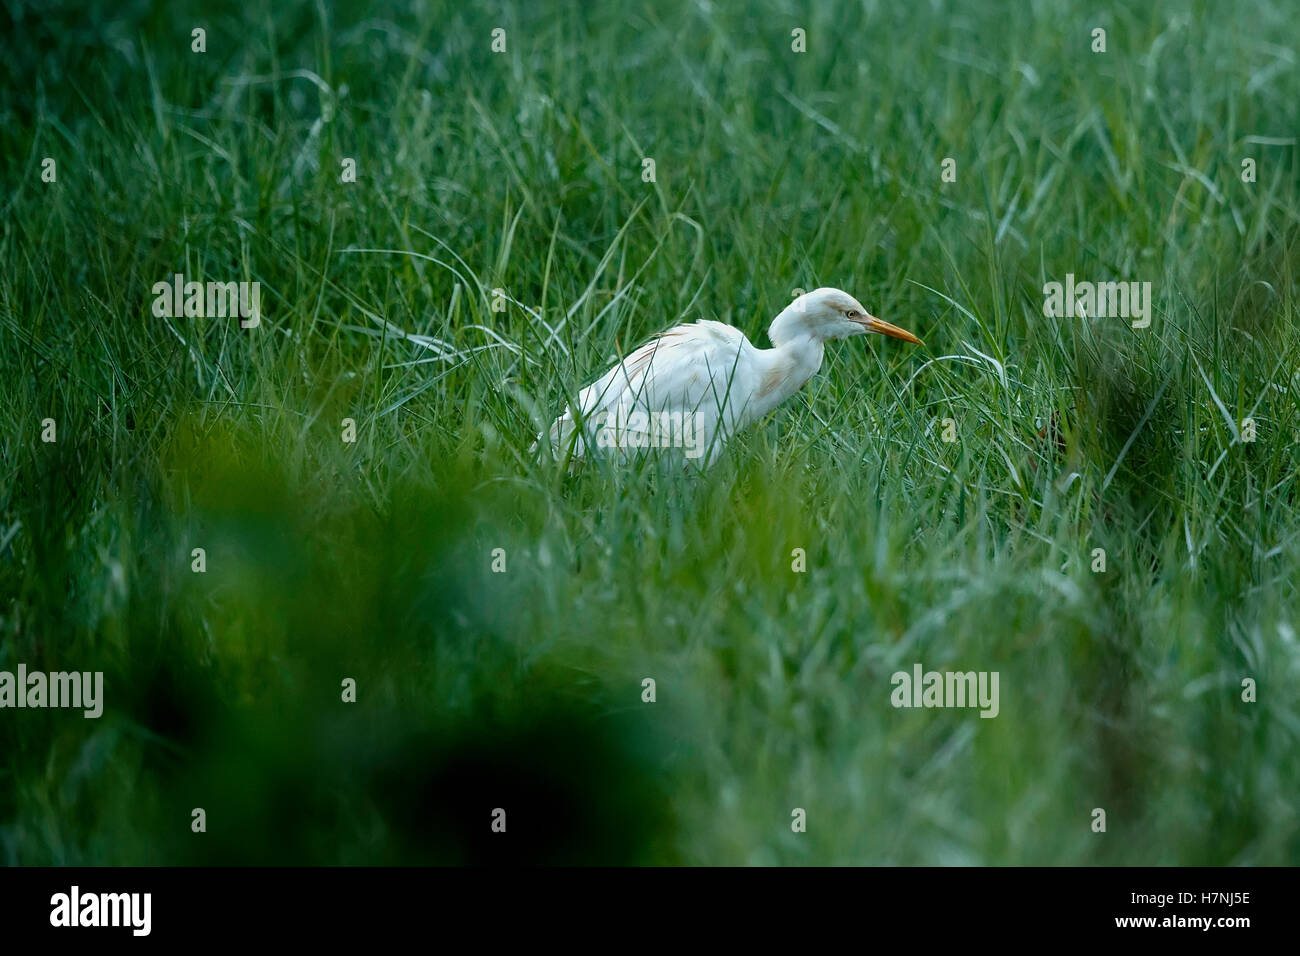 Great egret in natural habitat with green grass background Stock Photo